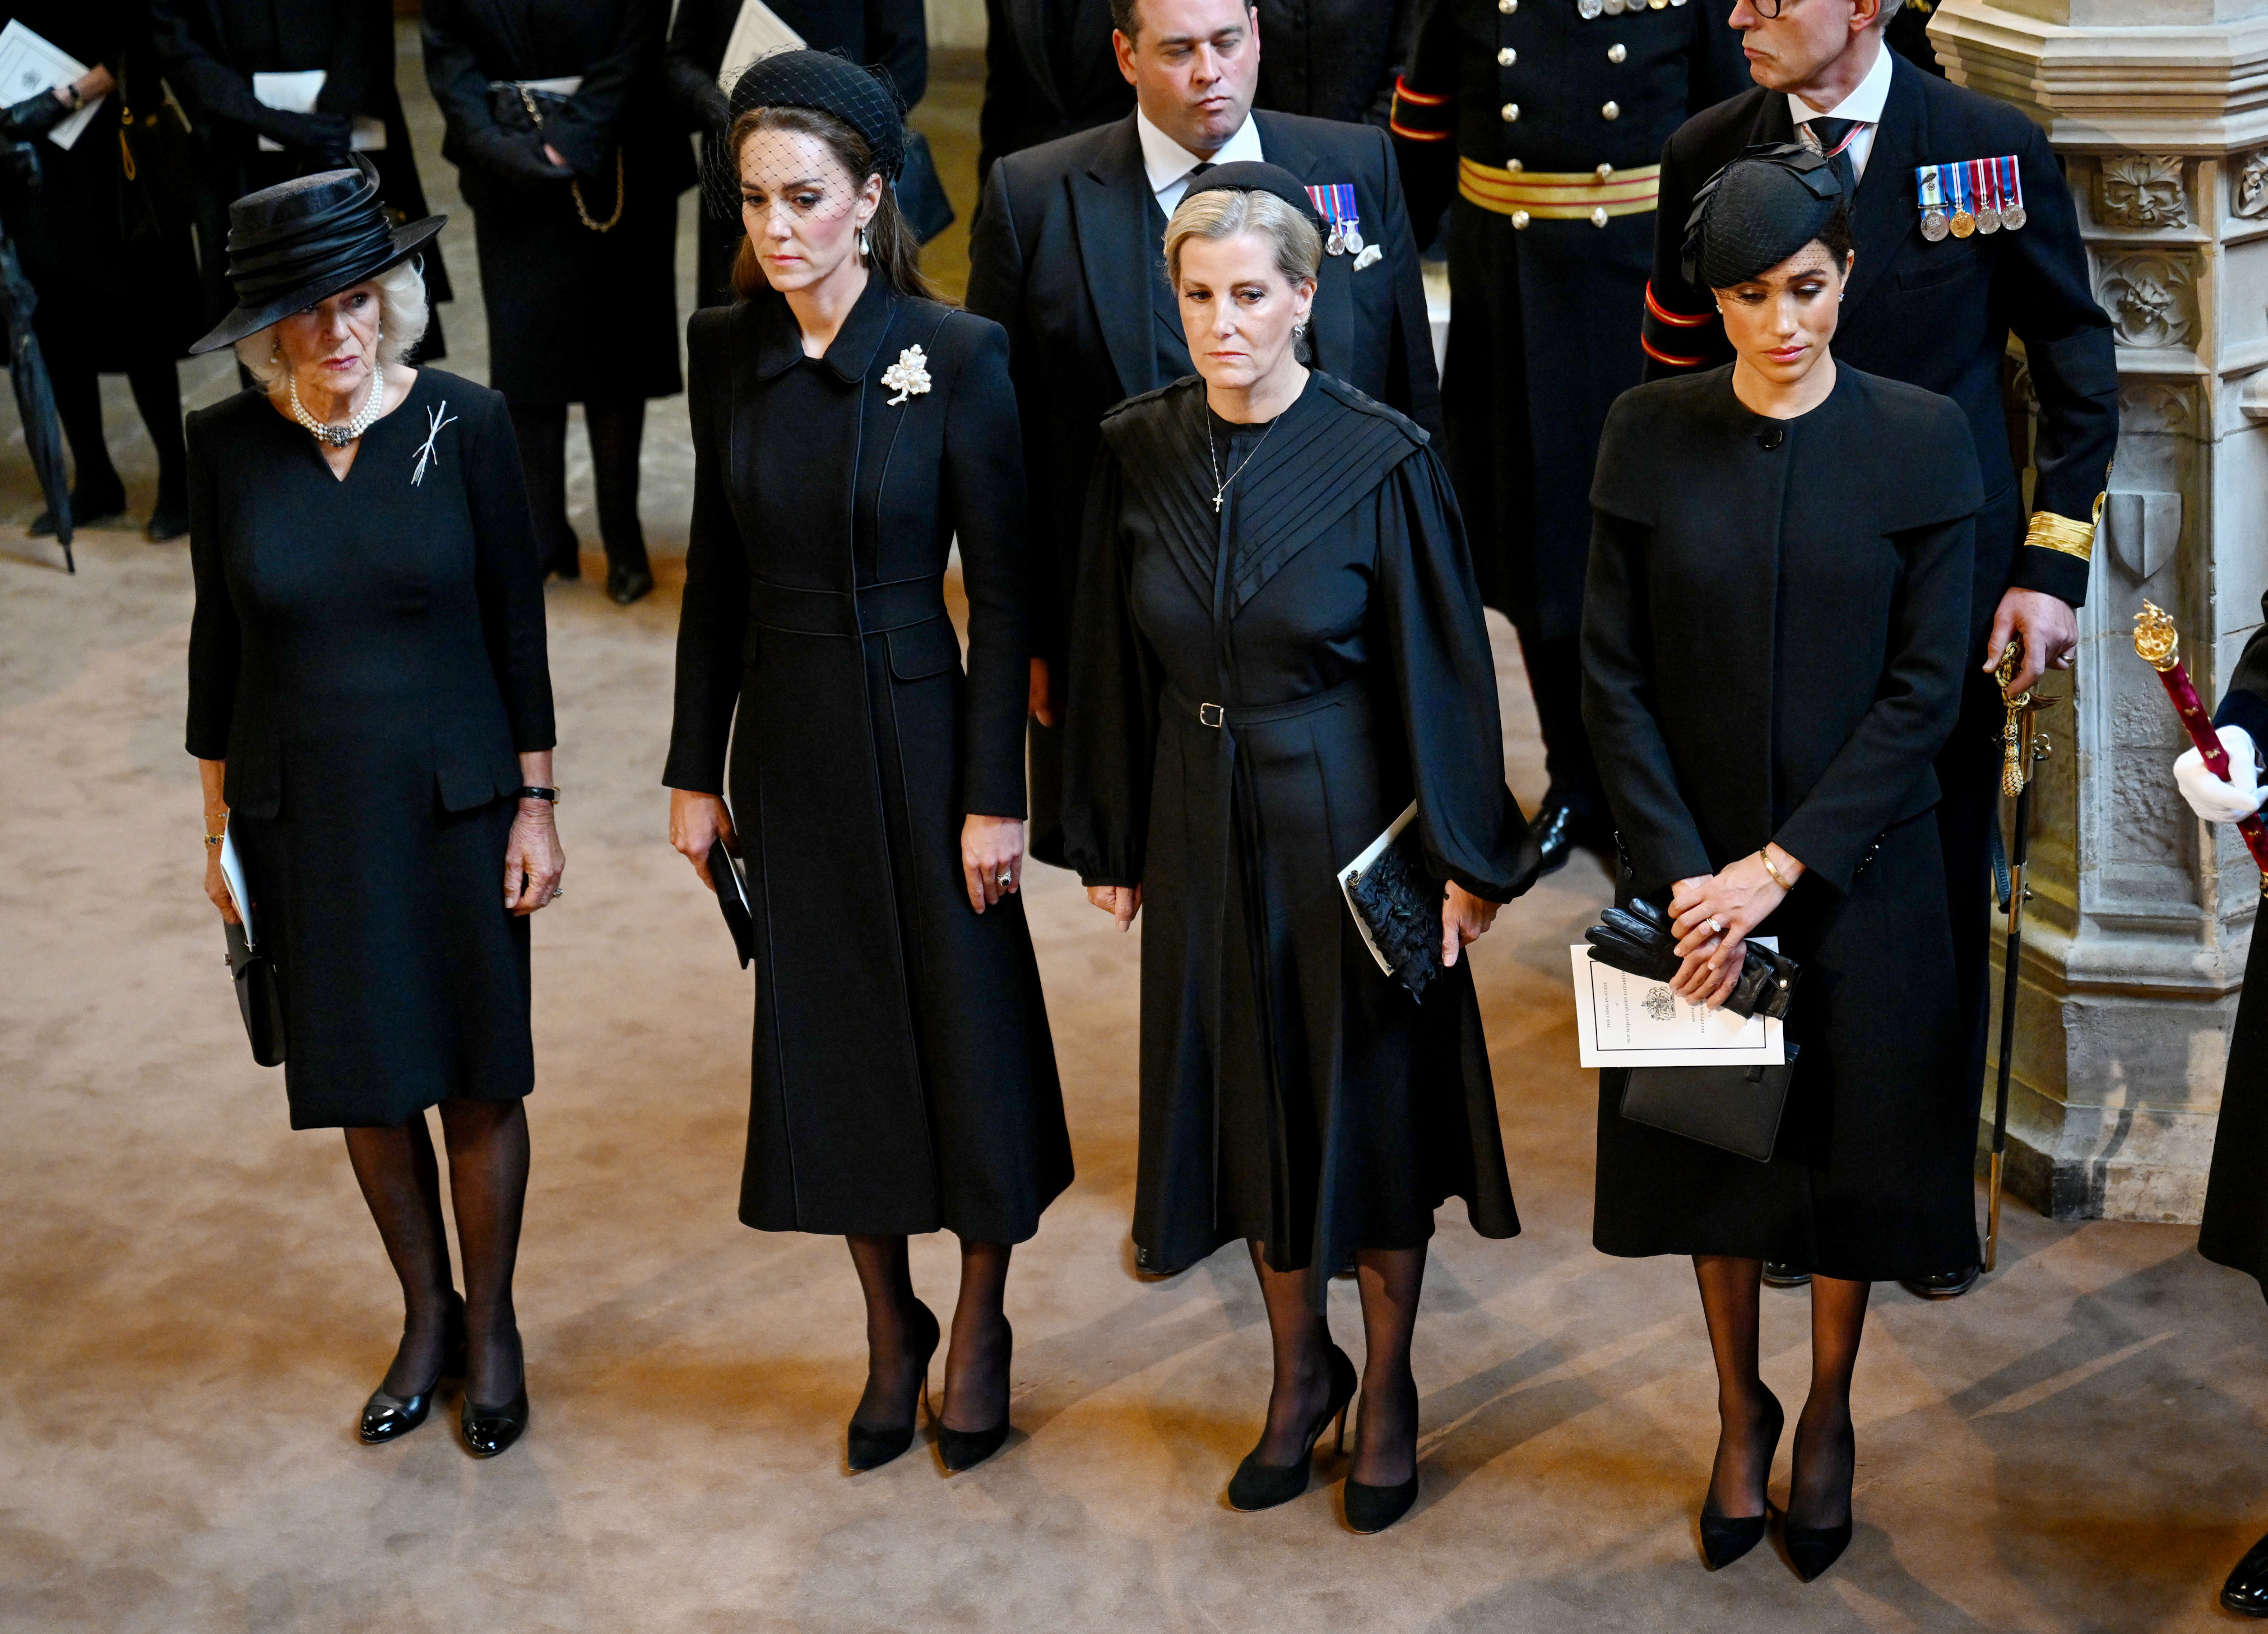 <p>On Sept. 14, 2022, Camilla, Queen Consort, Princess Kate, Sophie, Countess of Wessex and Duchess Meghan stood together and paid their respects as Queen Elizabeth II's coffin was carried into Westminster Hall, where it will lie in state until her funeral, following a procession from Buckingham Palace through the streets of London.</p>